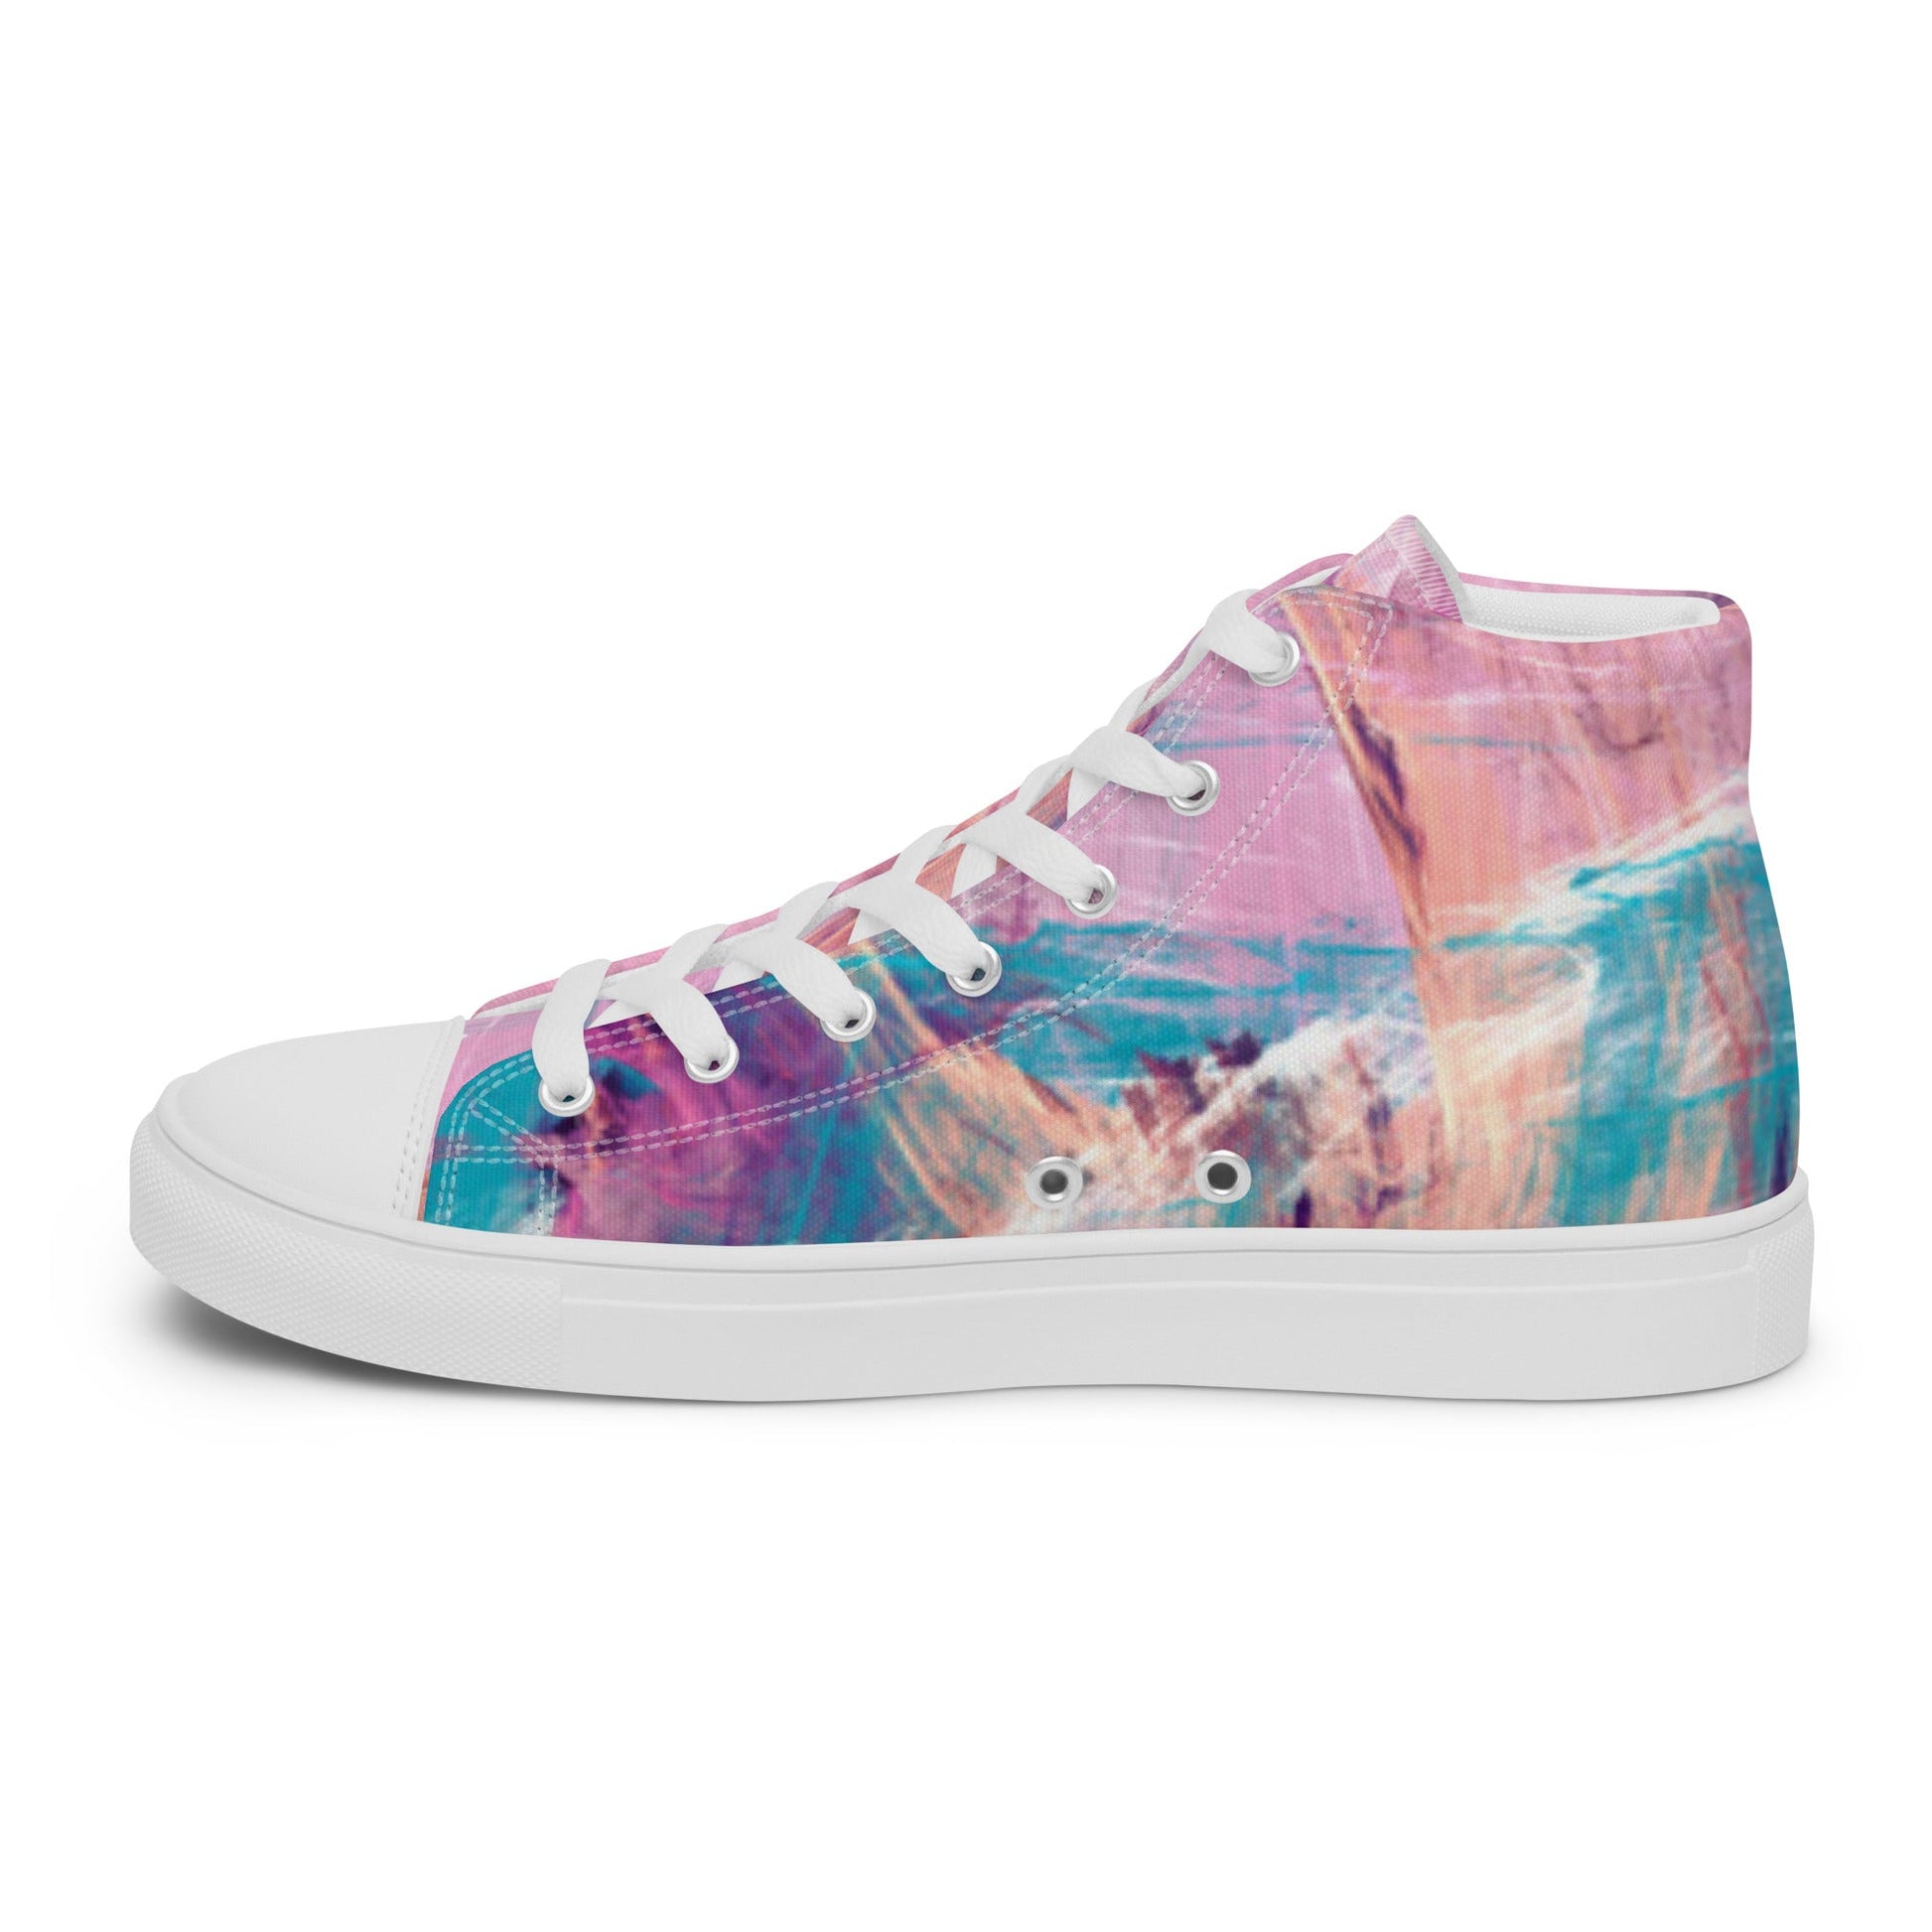 Cotton Candy Women’s high top canvas shoes - Catch This Tea Shirts